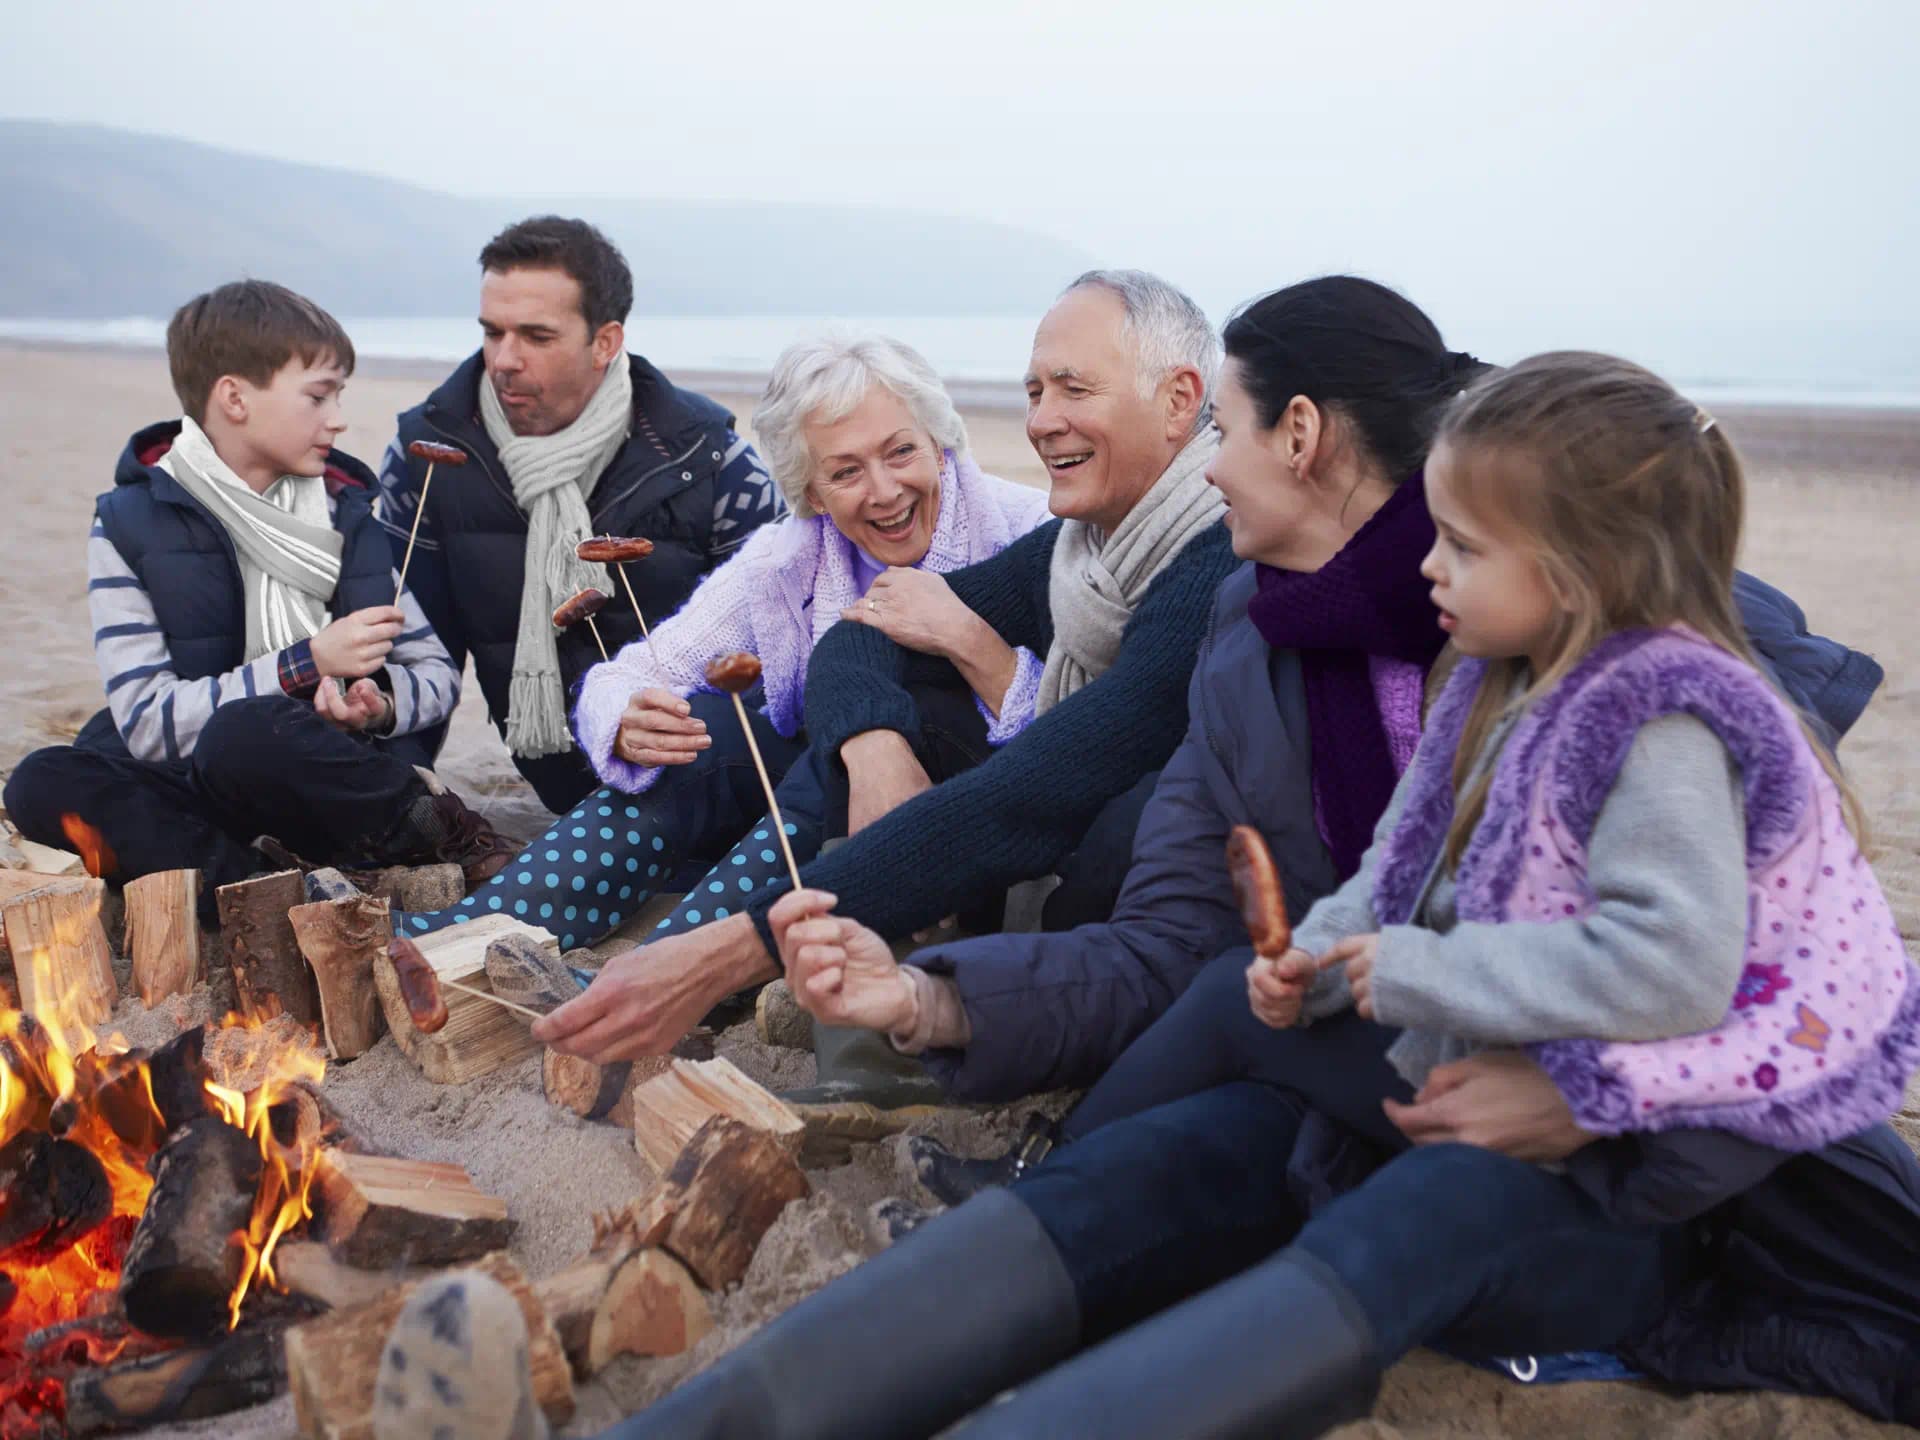 Socialising with family can be hard is you have a hearing loss